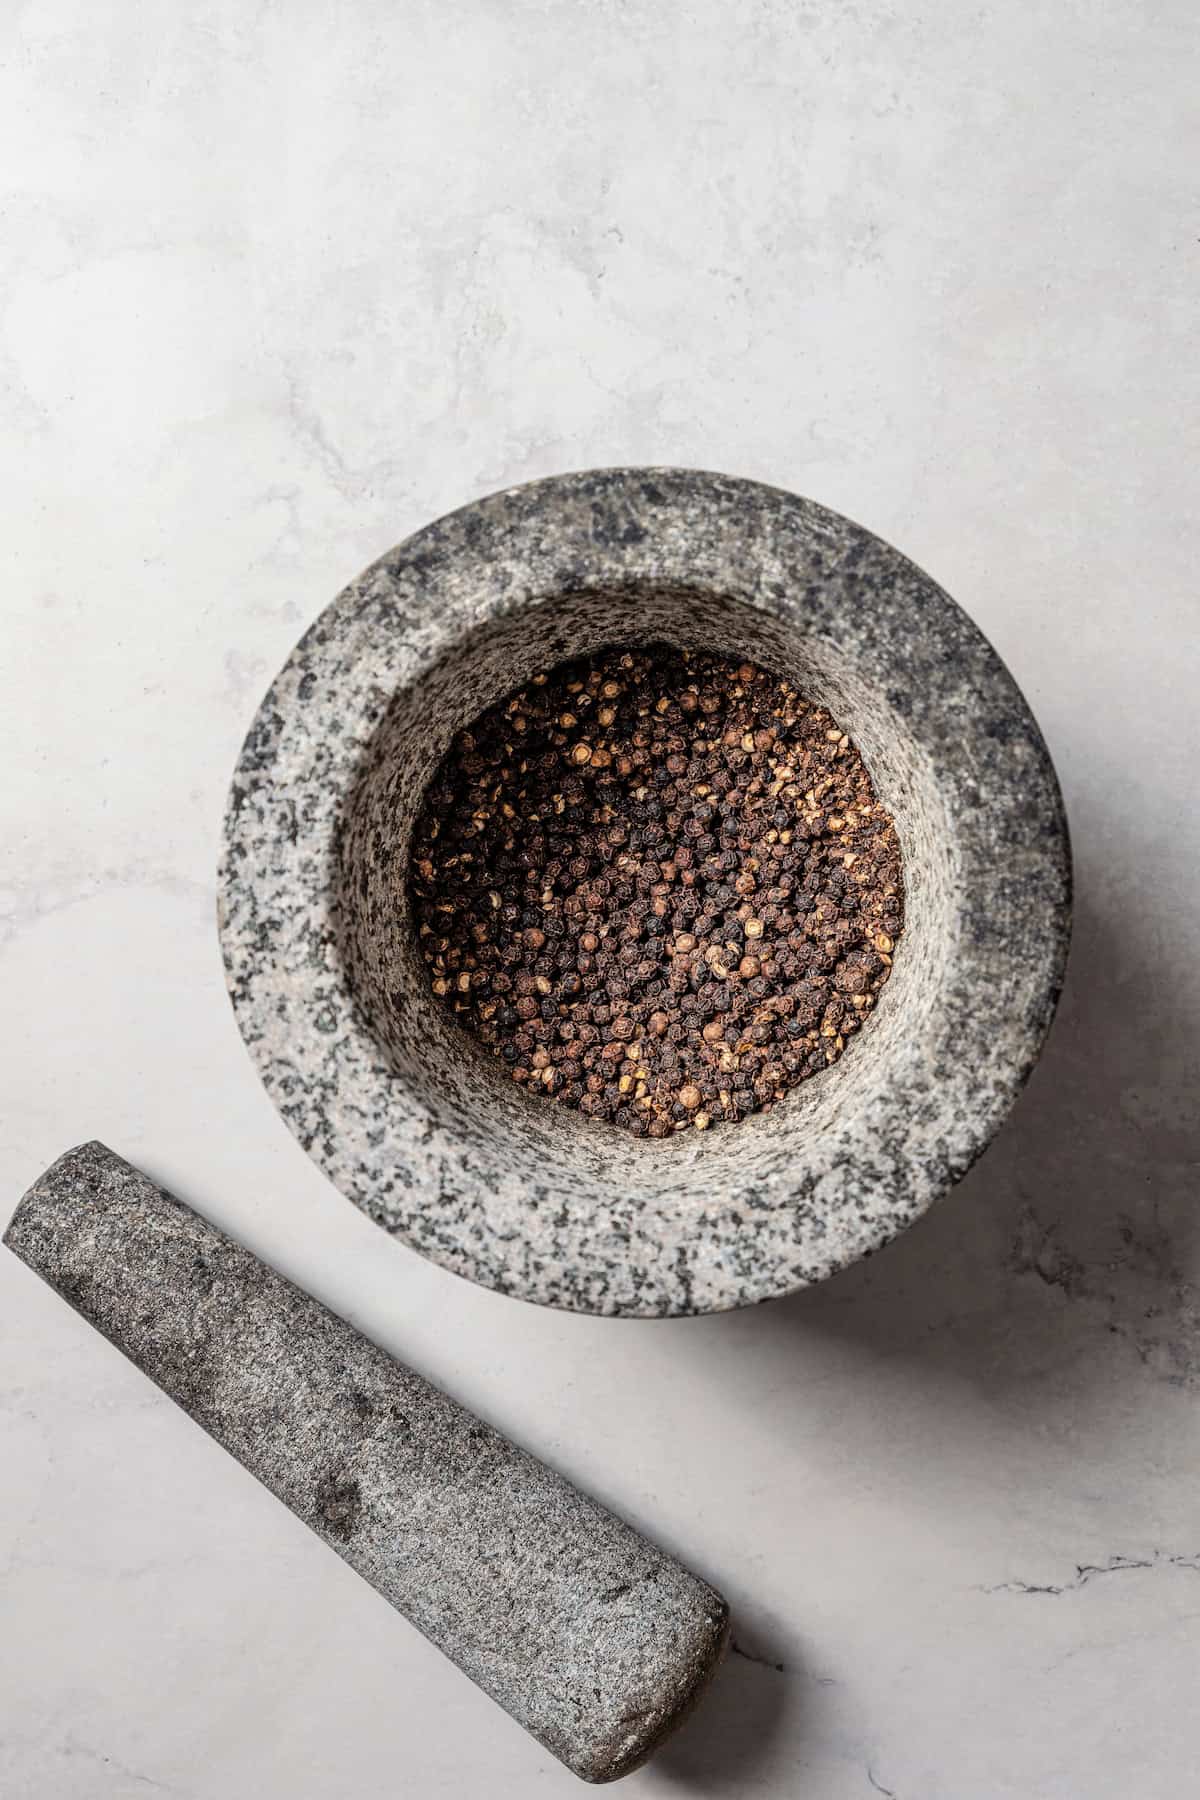 Overhead view of a mortar filled with crushed peppercorns next to a pestle.